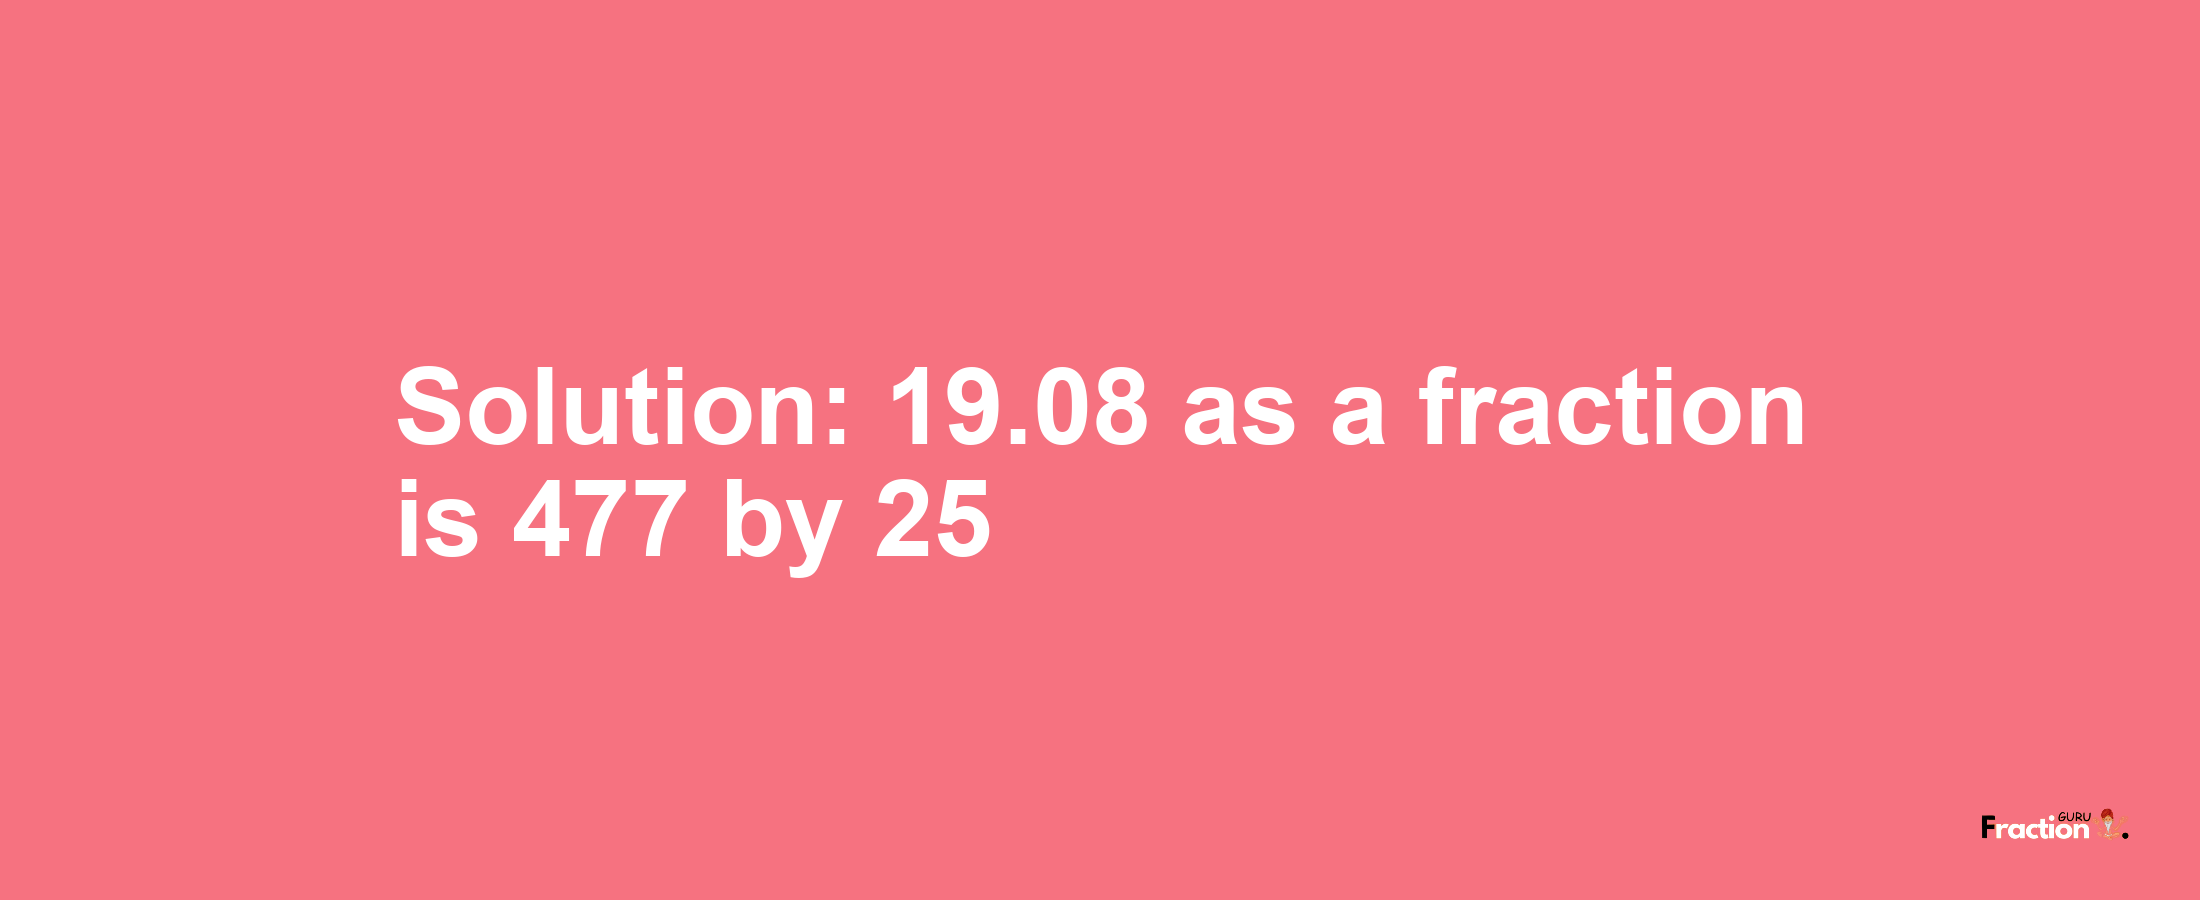 Solution:19.08 as a fraction is 477/25